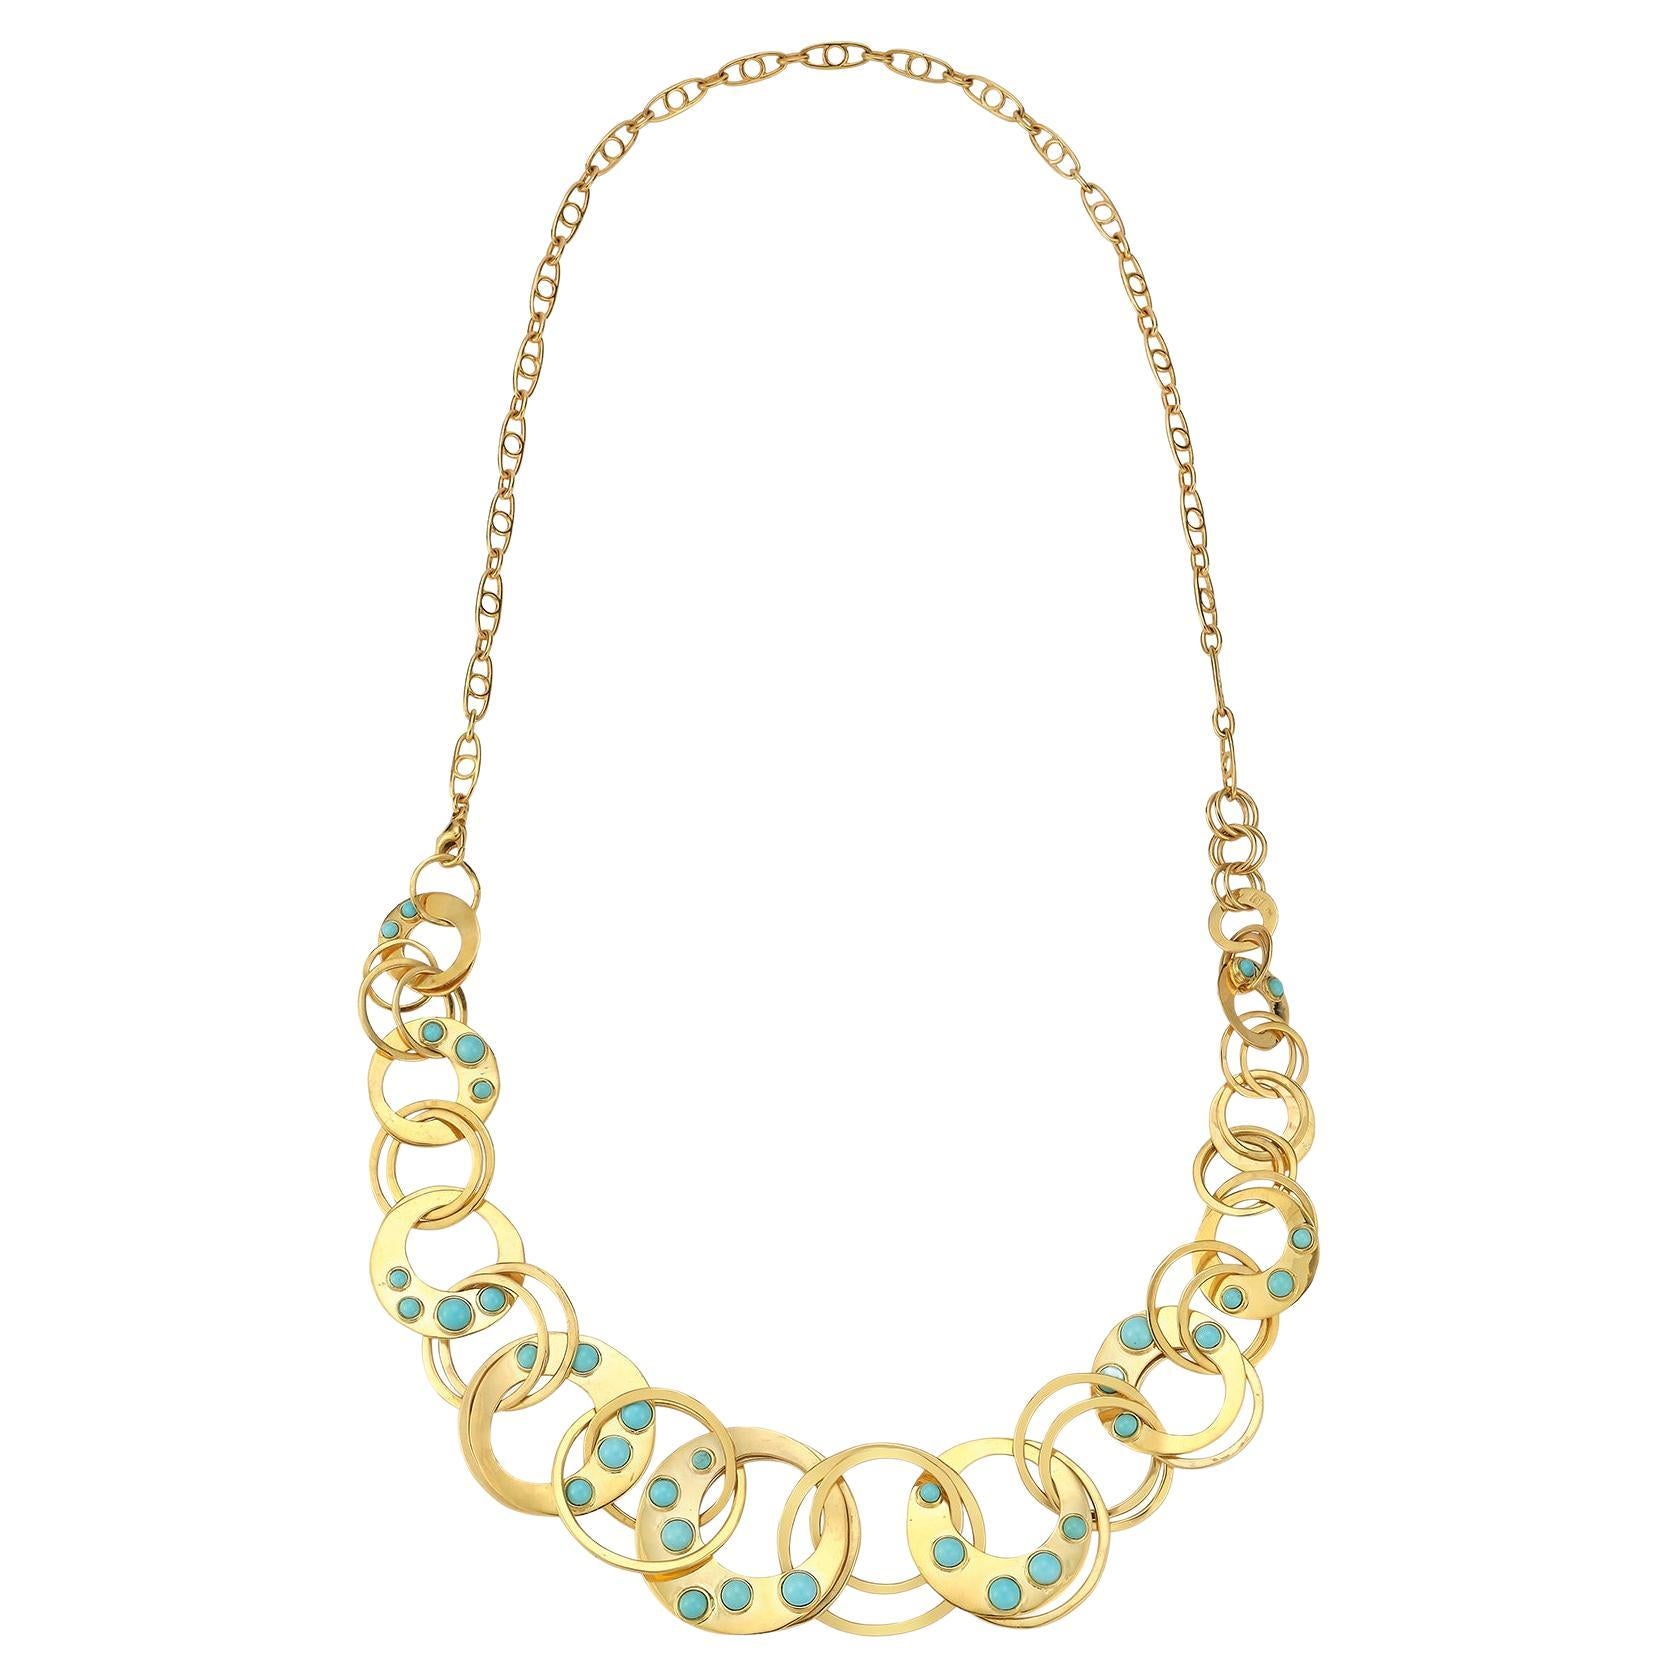 Turquoise & Gold Necklace by Cusi 